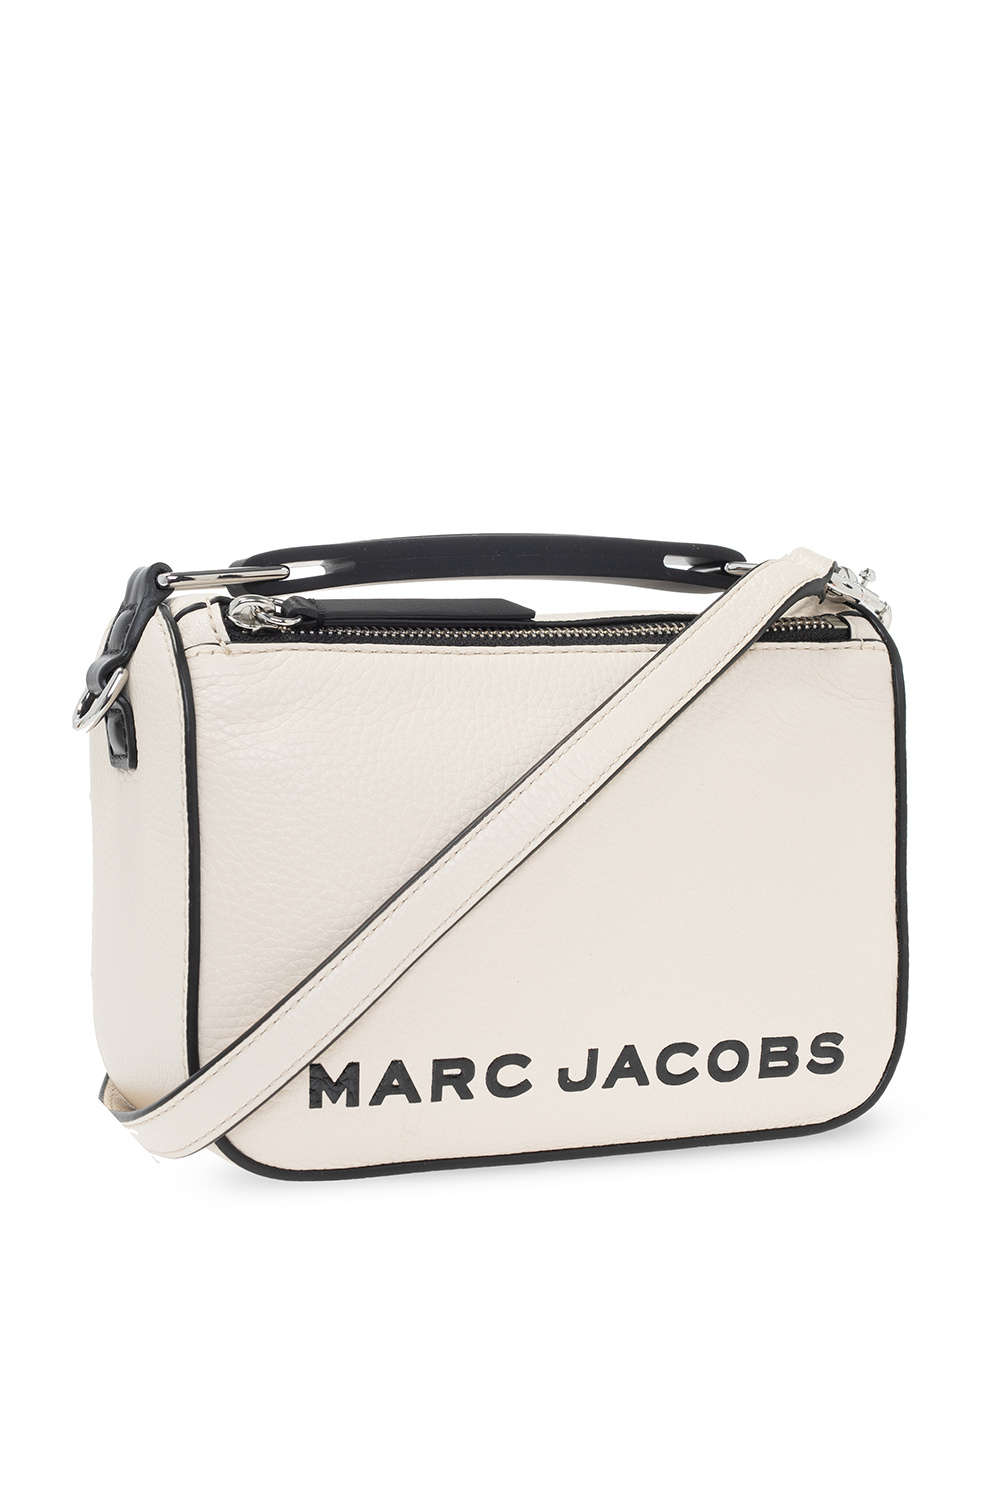 THE Snapshot Small Camera Bag Marc Jacobs in Mint Julep Multi